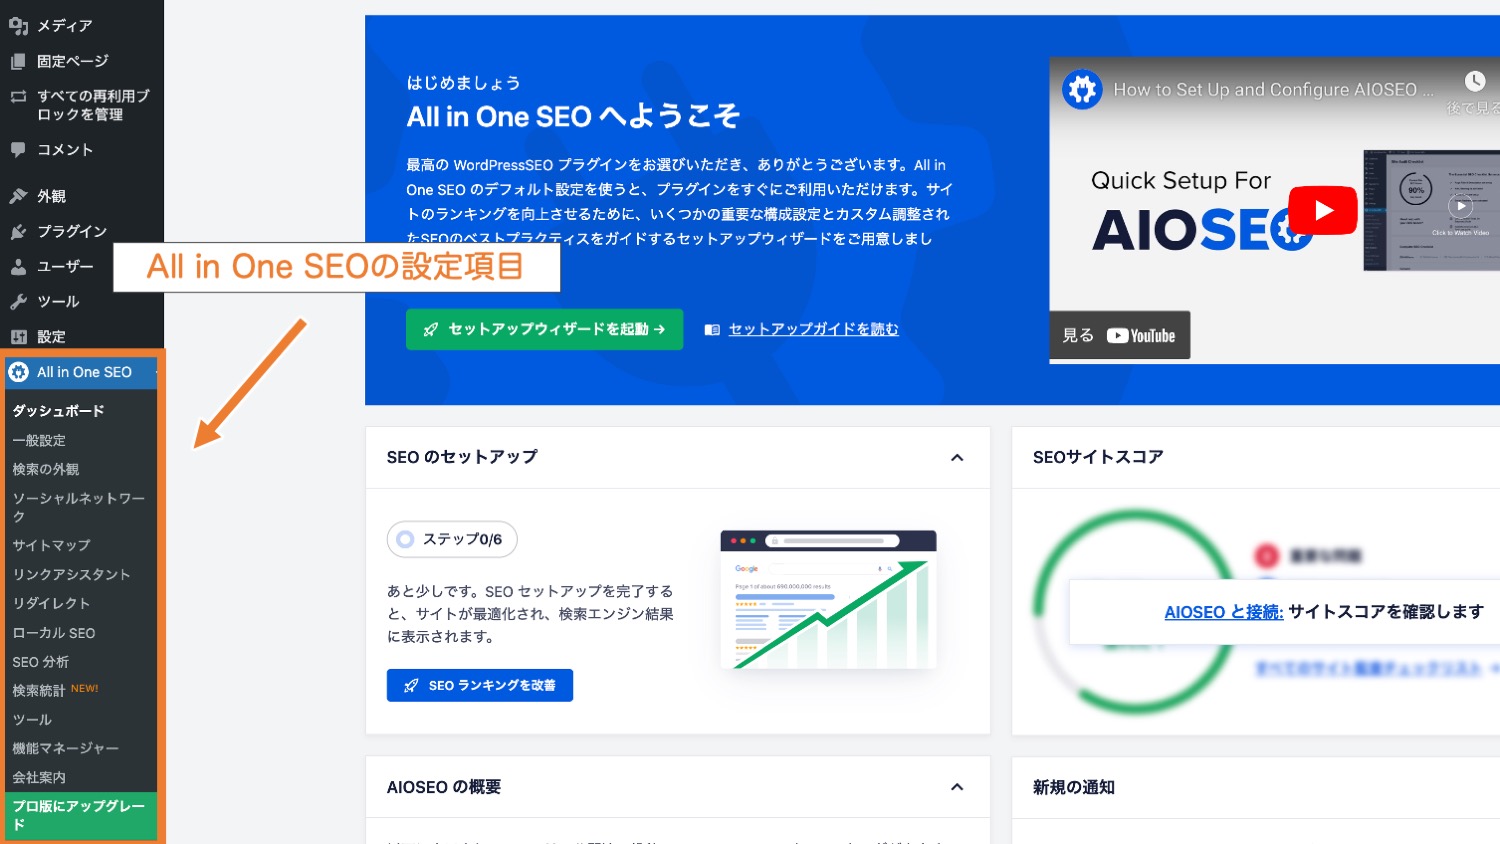 All in One SEOの設定項目